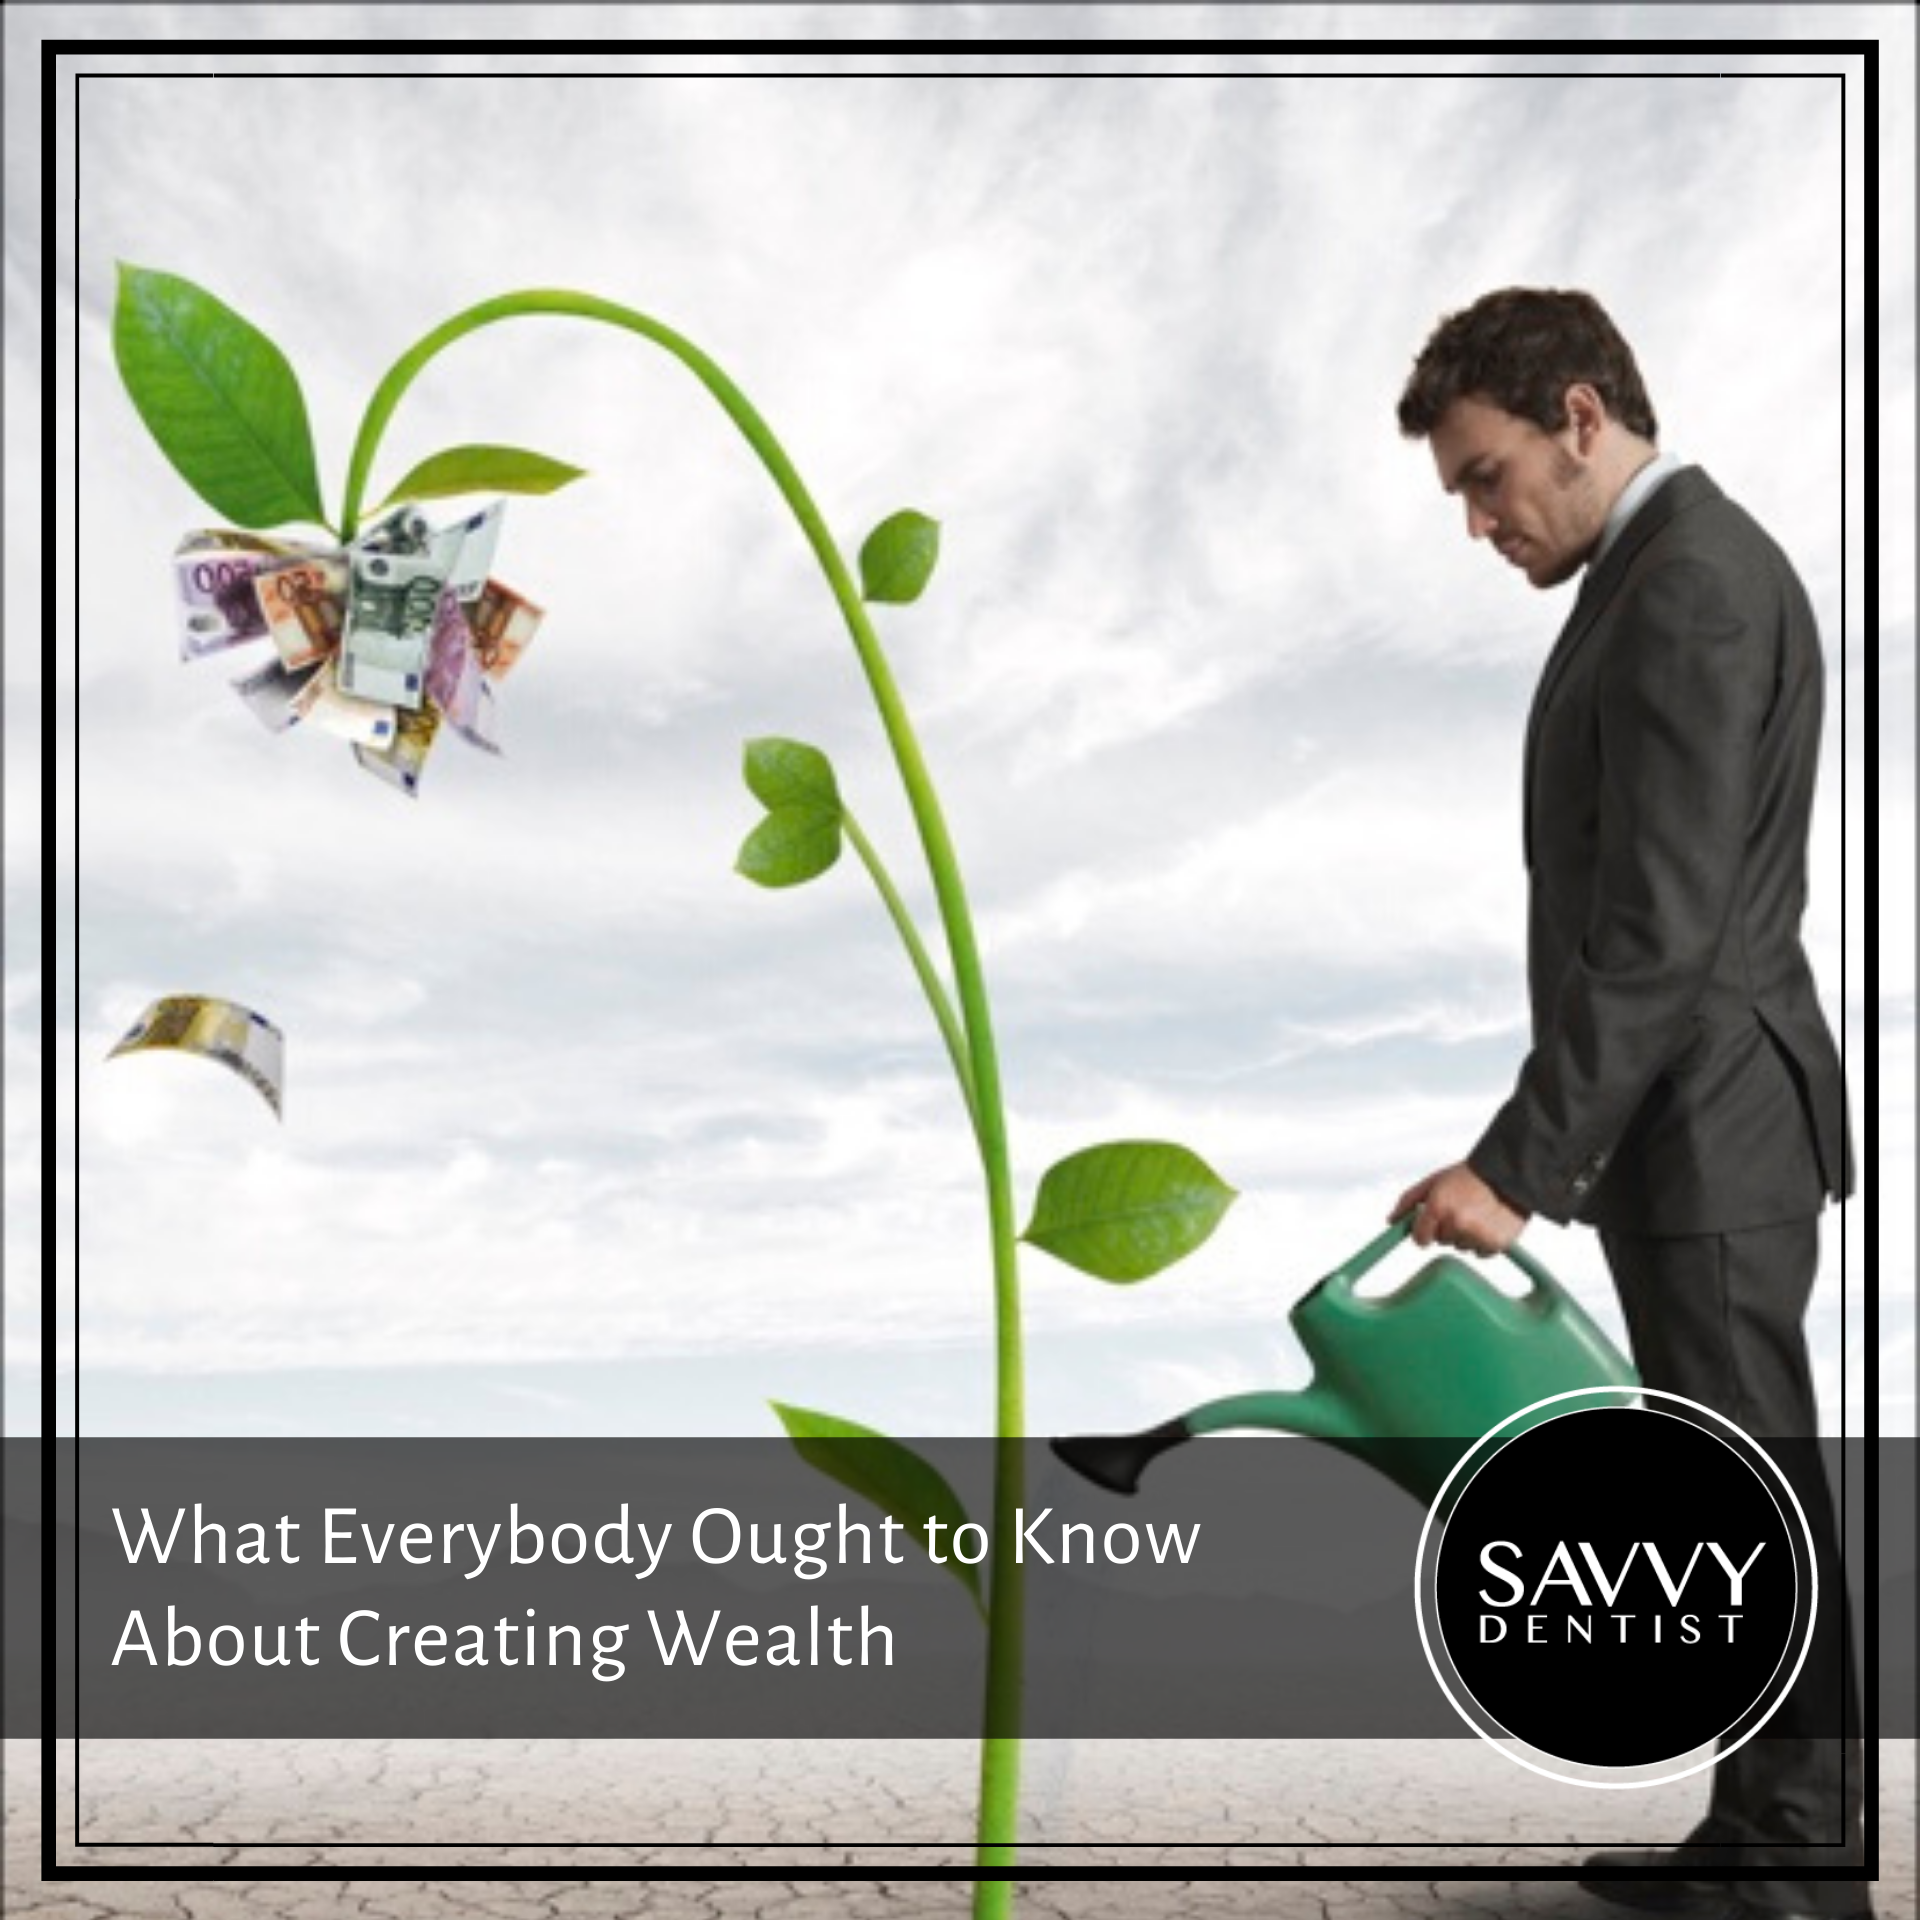 What Everybody Ought to Know About Creating Wealth